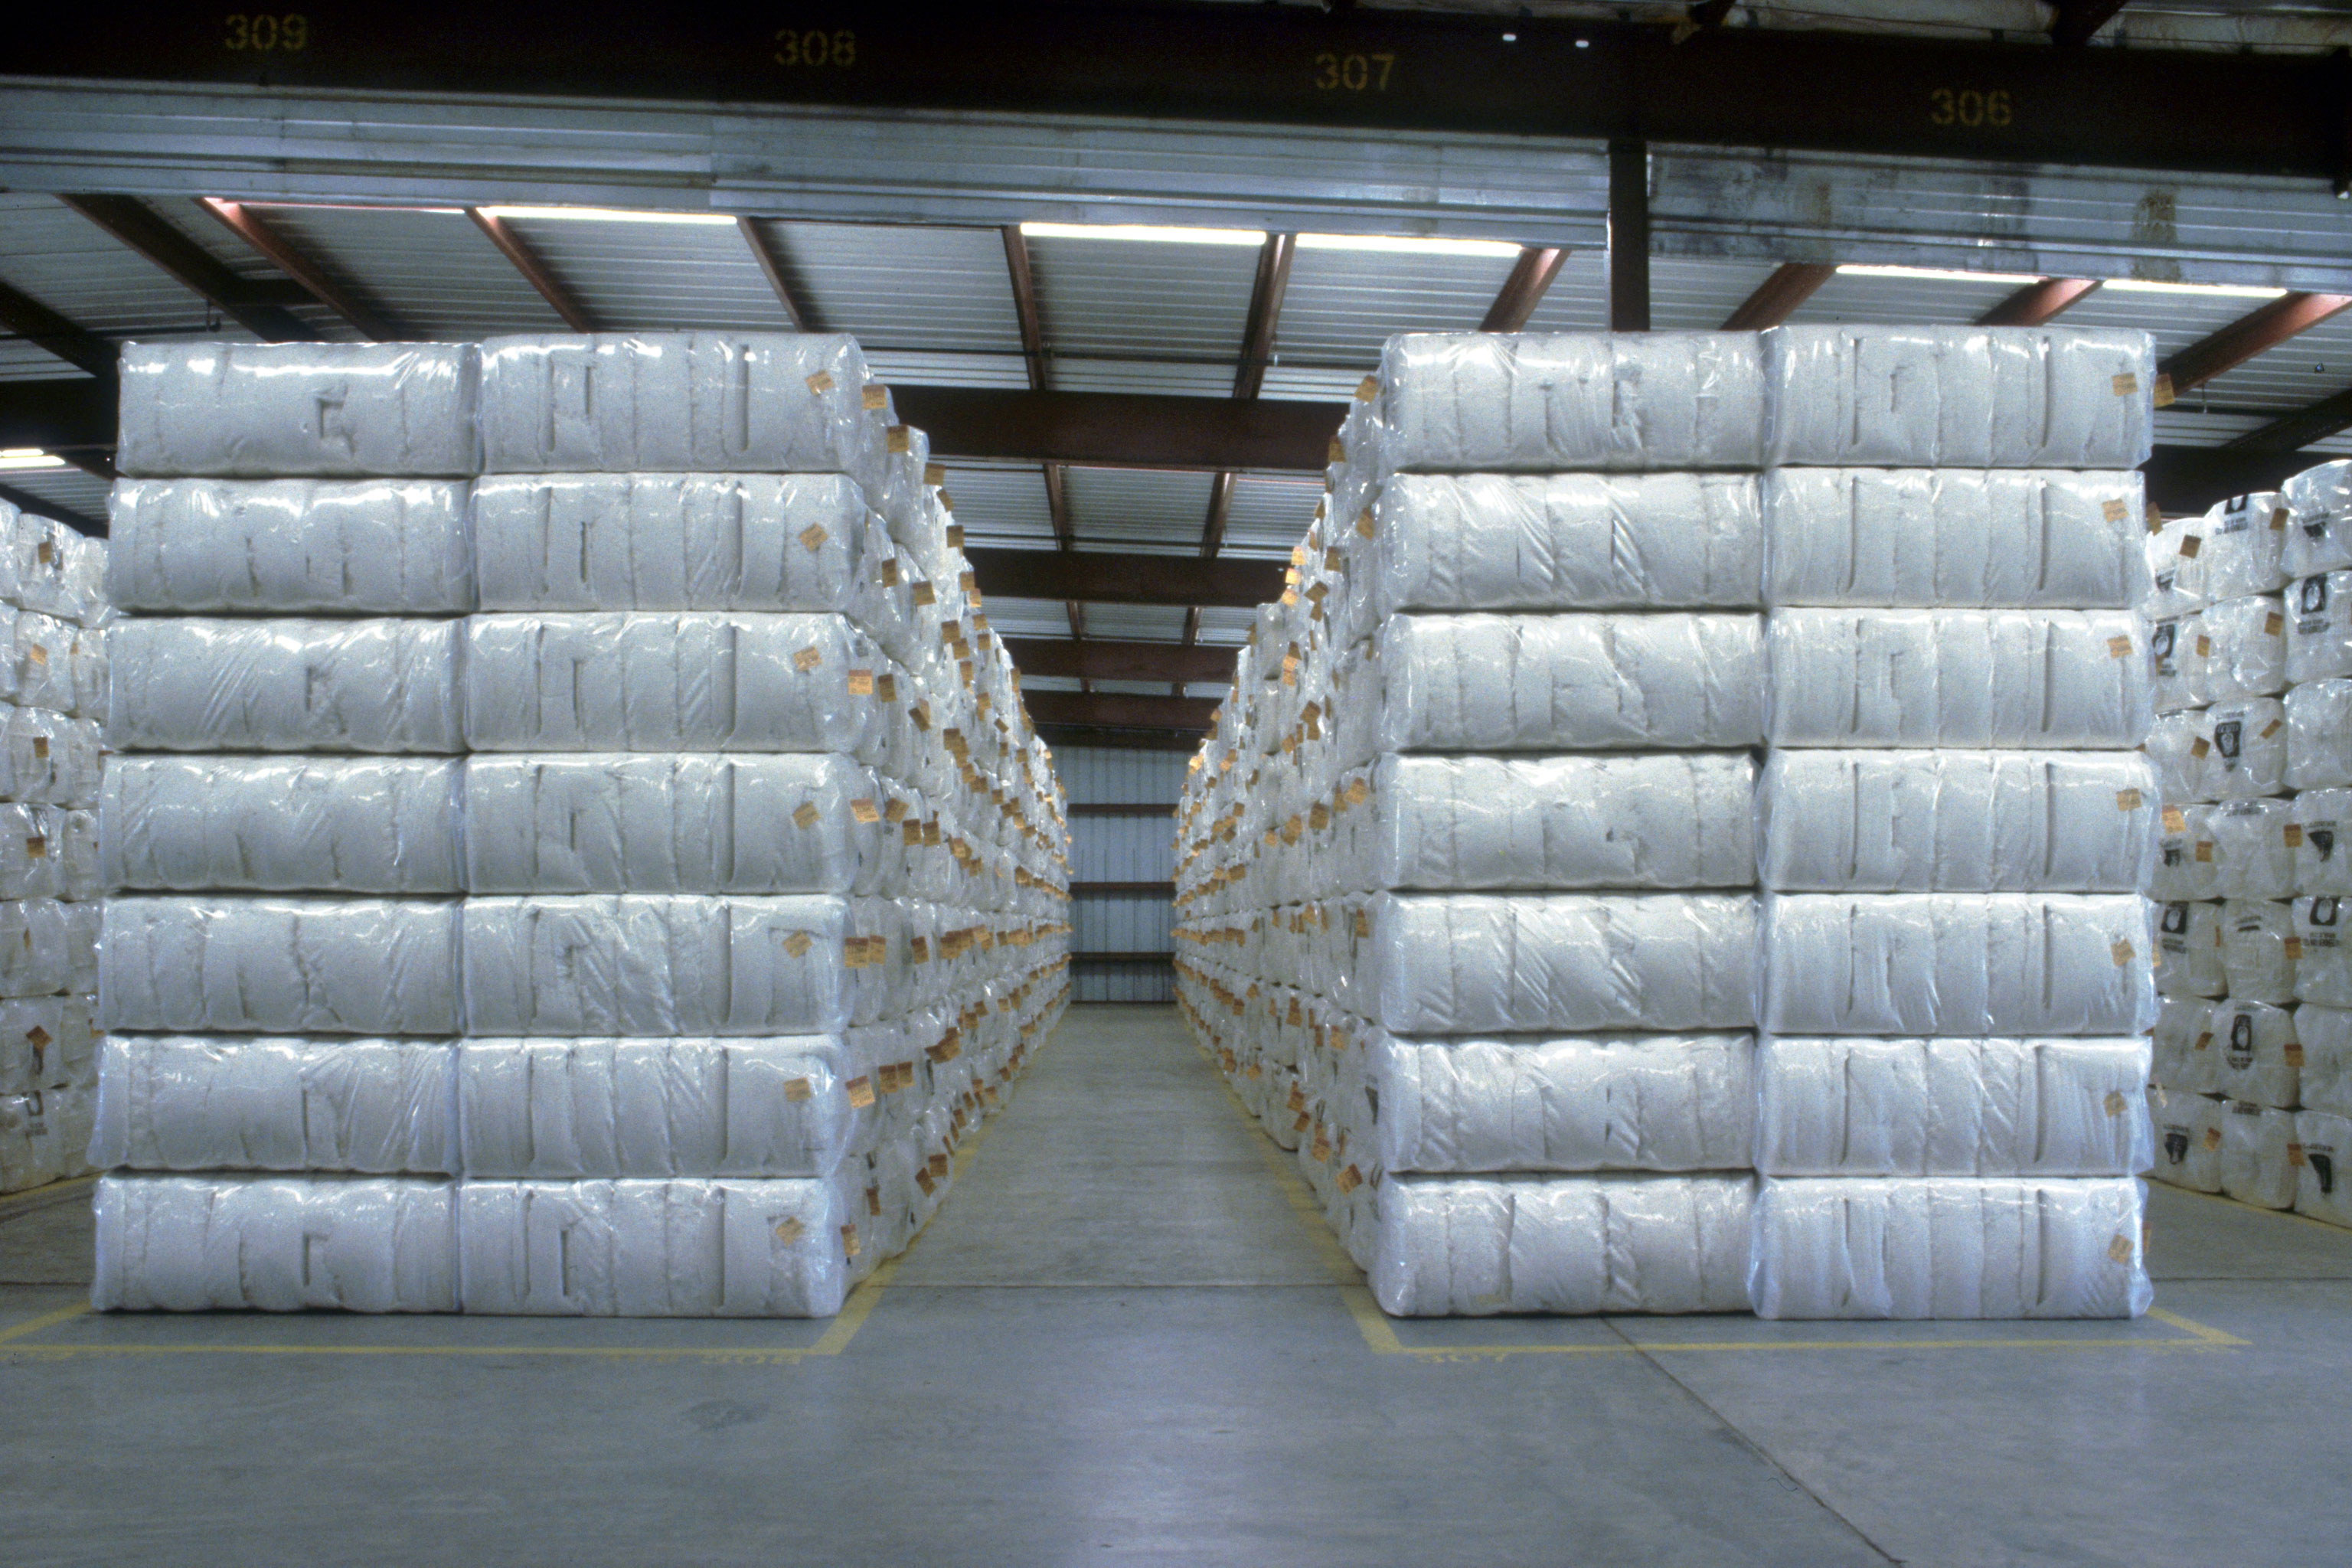 Bales of cotton in a warehouse